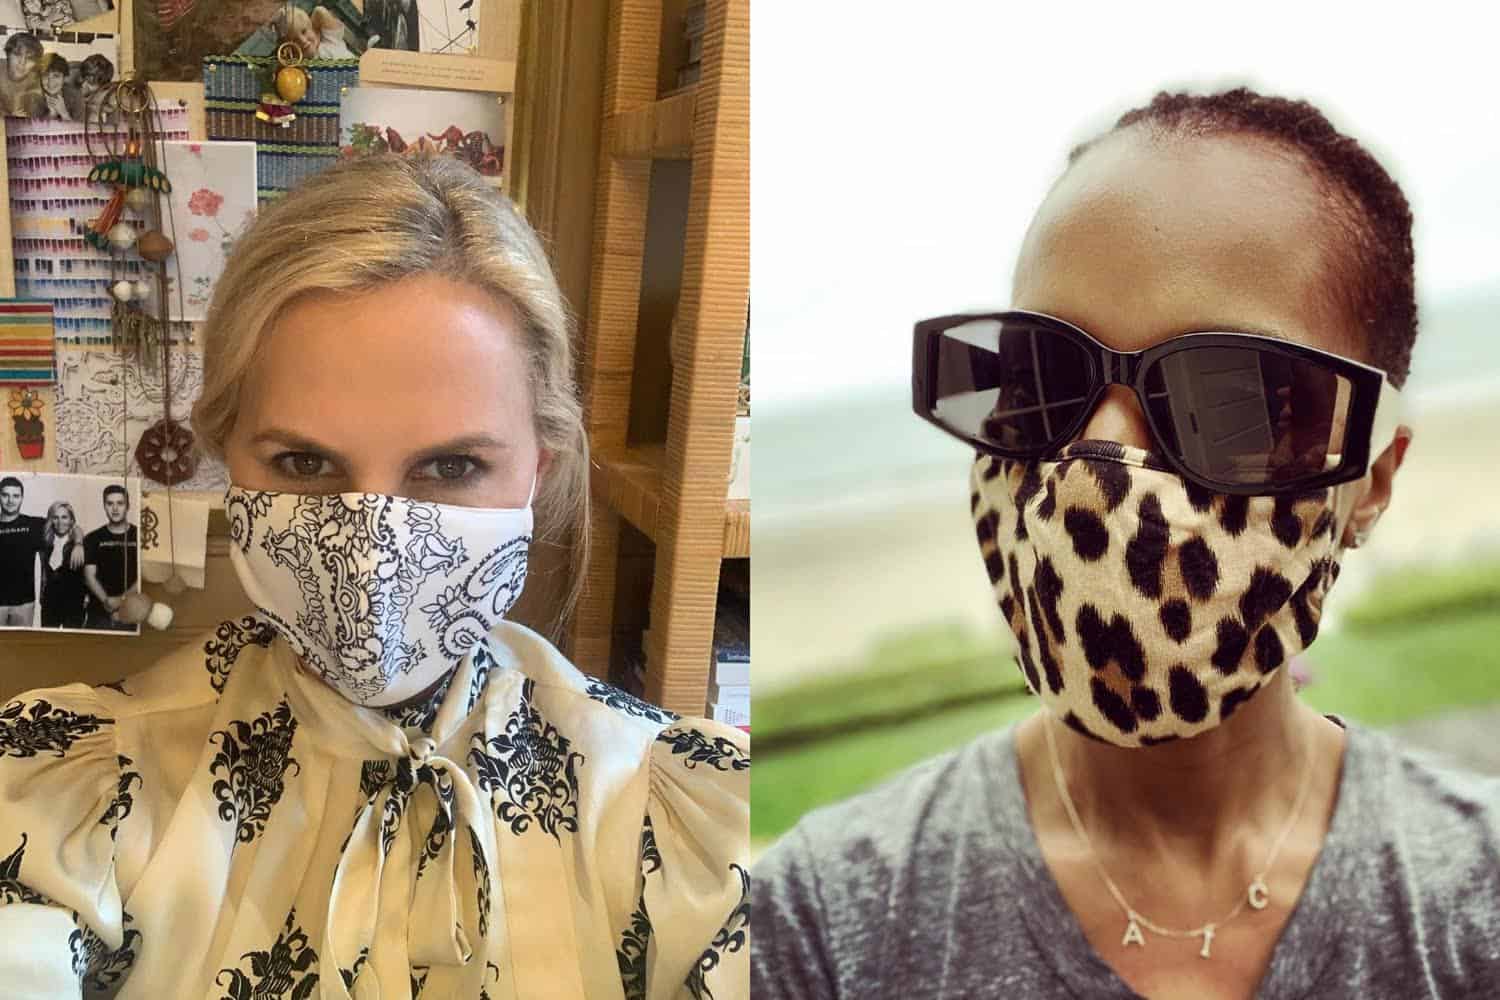 Tory Burch Challenges Friends To #WearaDamnMask - Daily Front Row